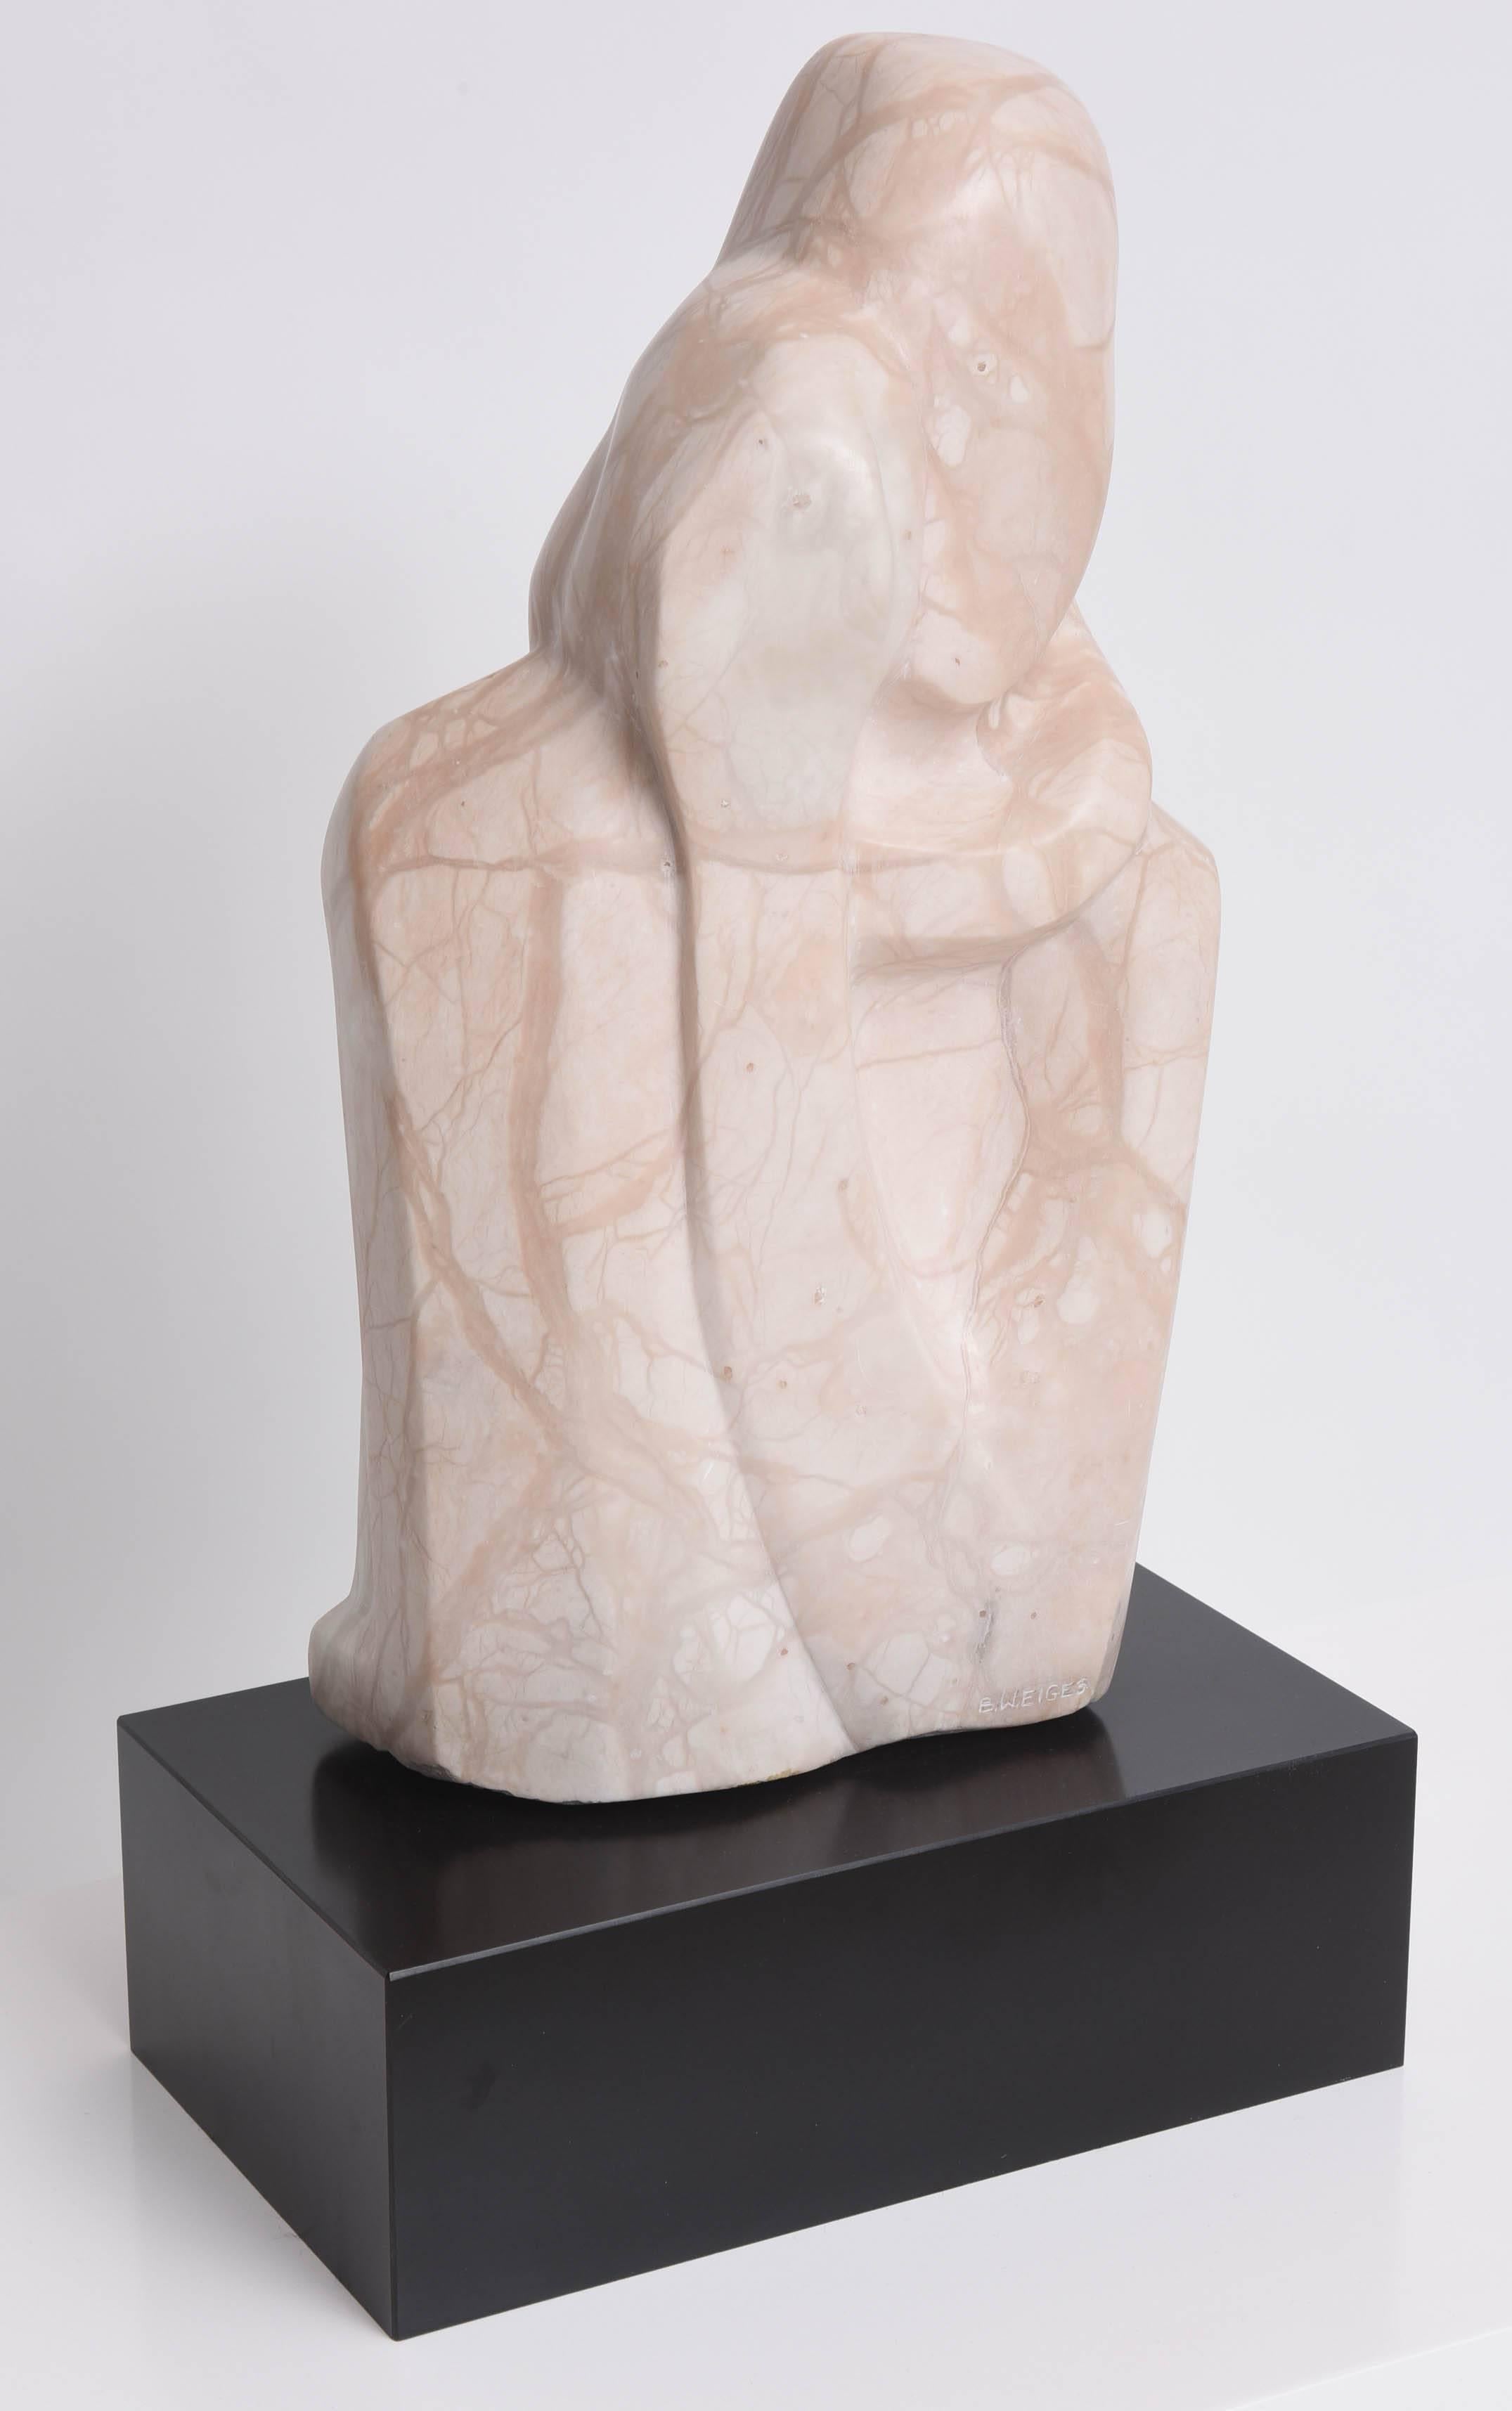 Modern Delete 4 WIP ------ Marble Sculpture, Mother and Child Embracing, Beatrice Eiges